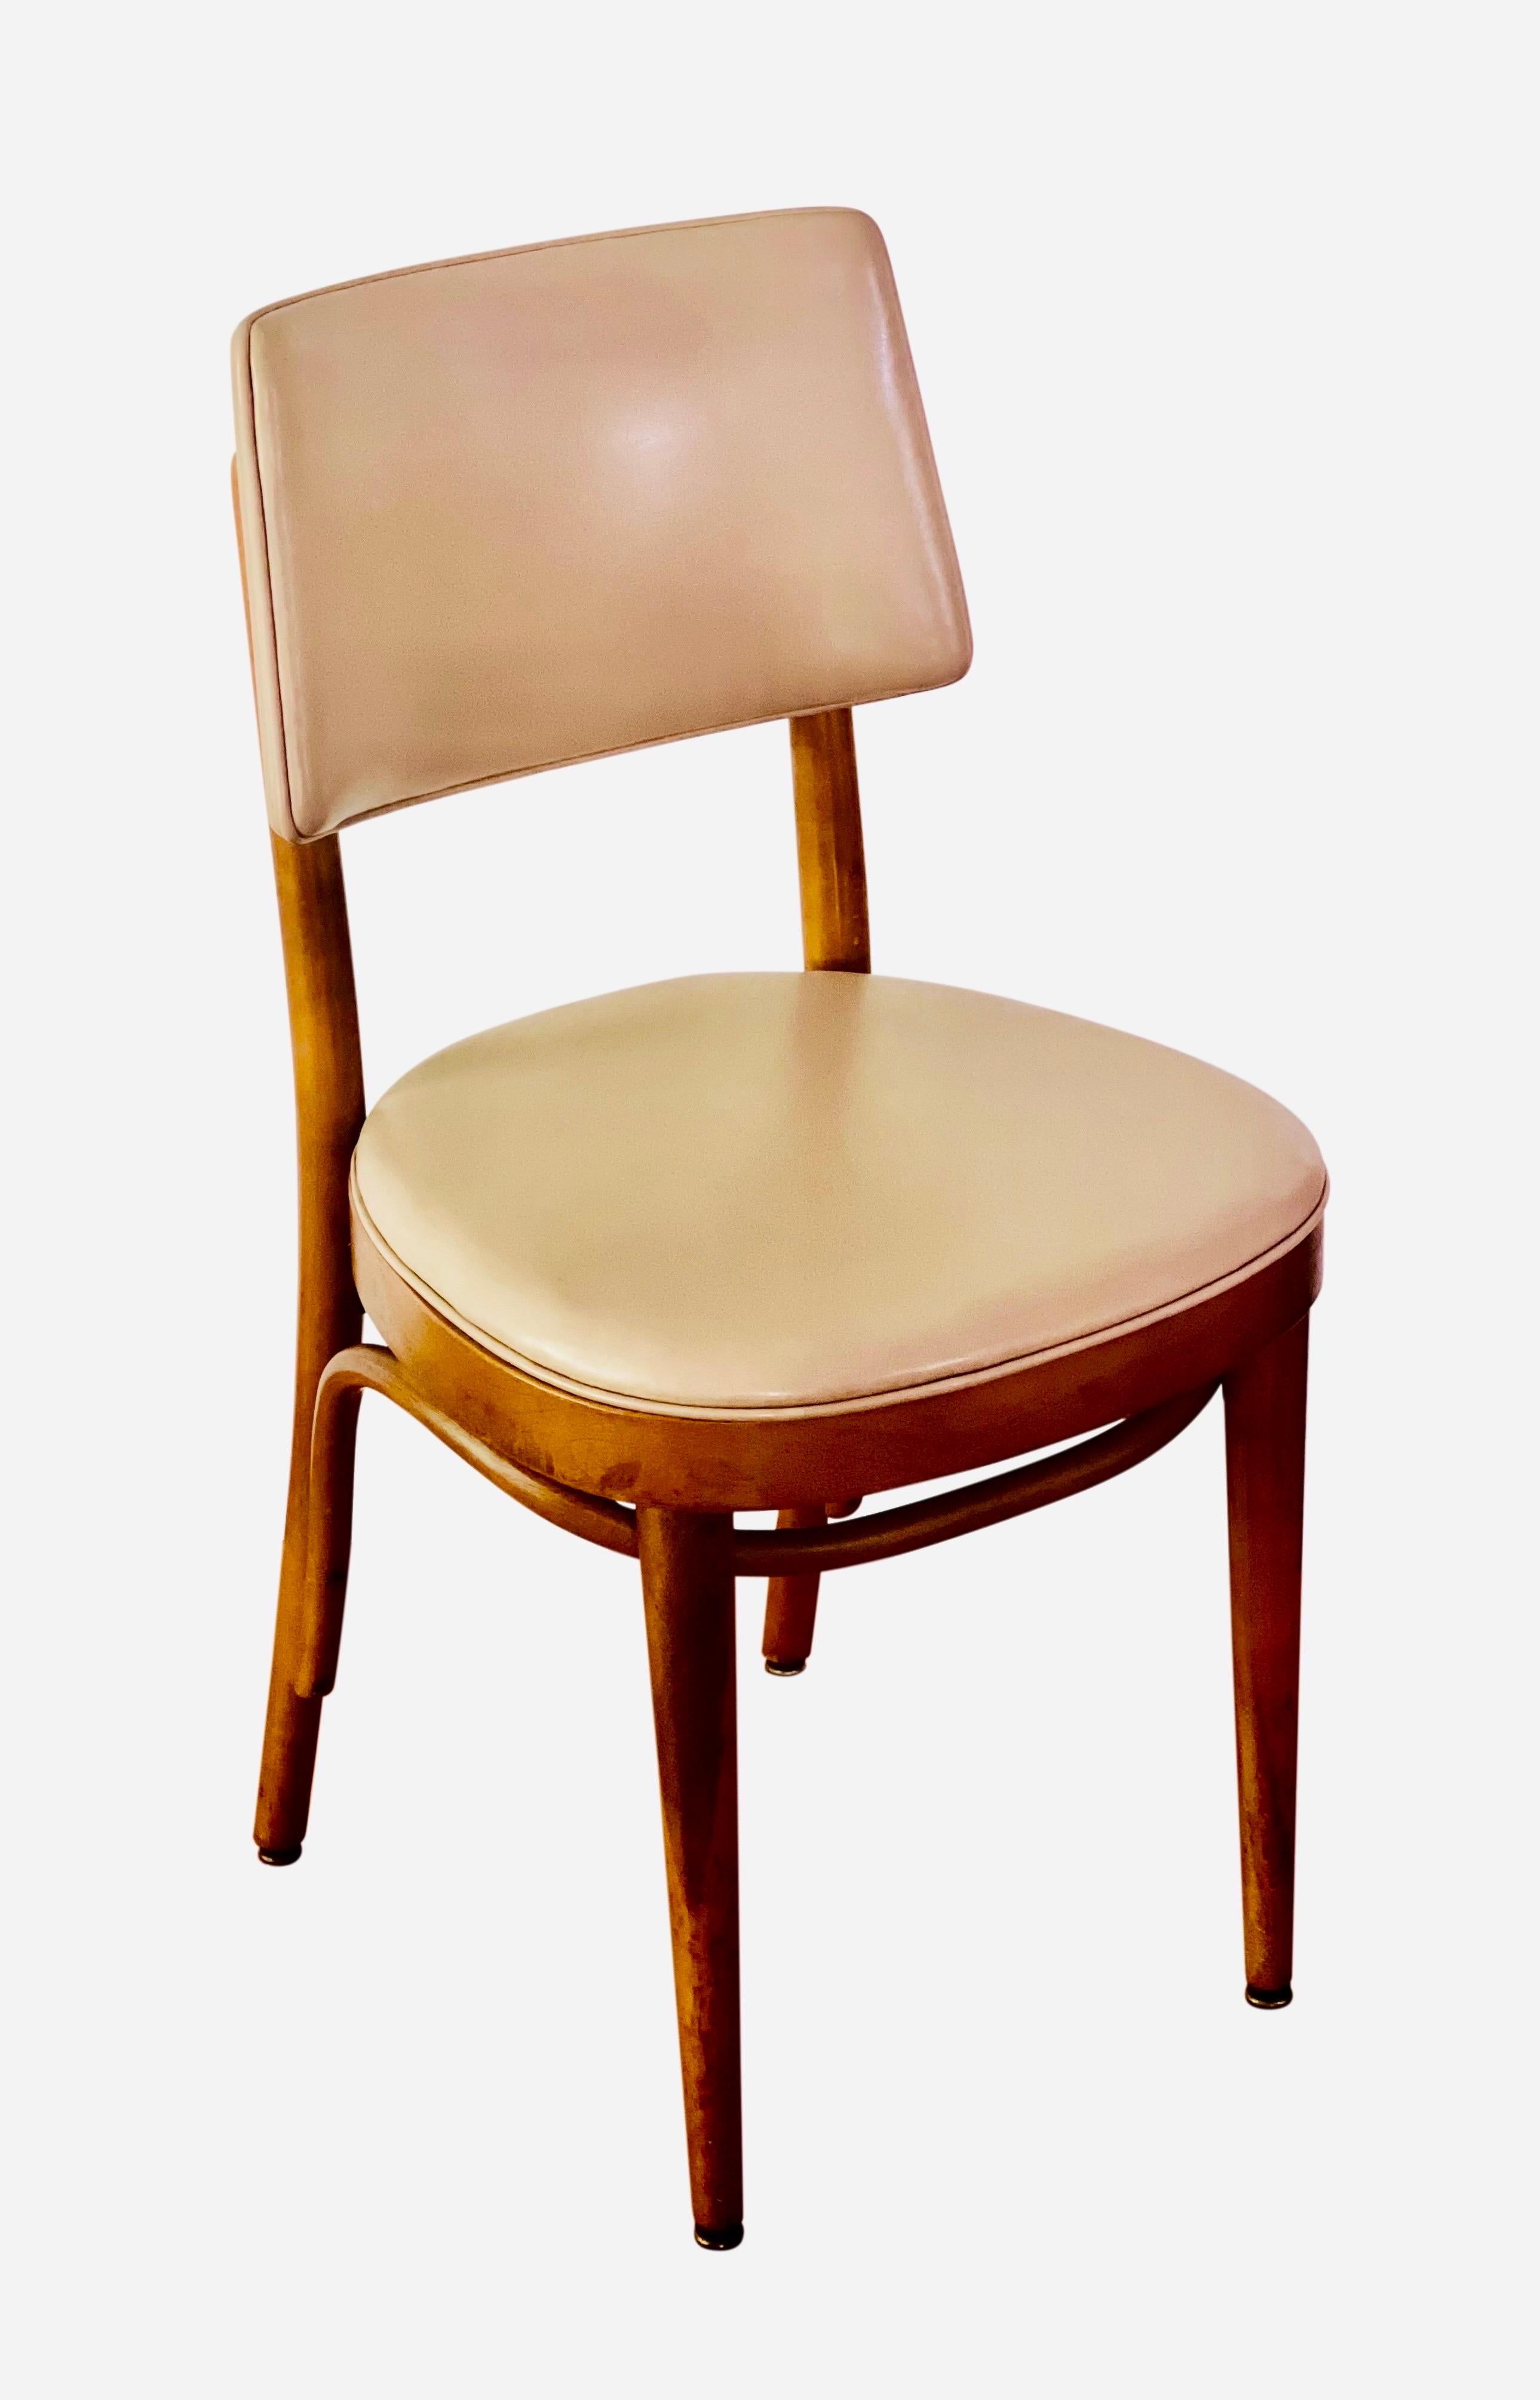 North American Midcentury Thonet Bentwood Upholstered Chair For Sale